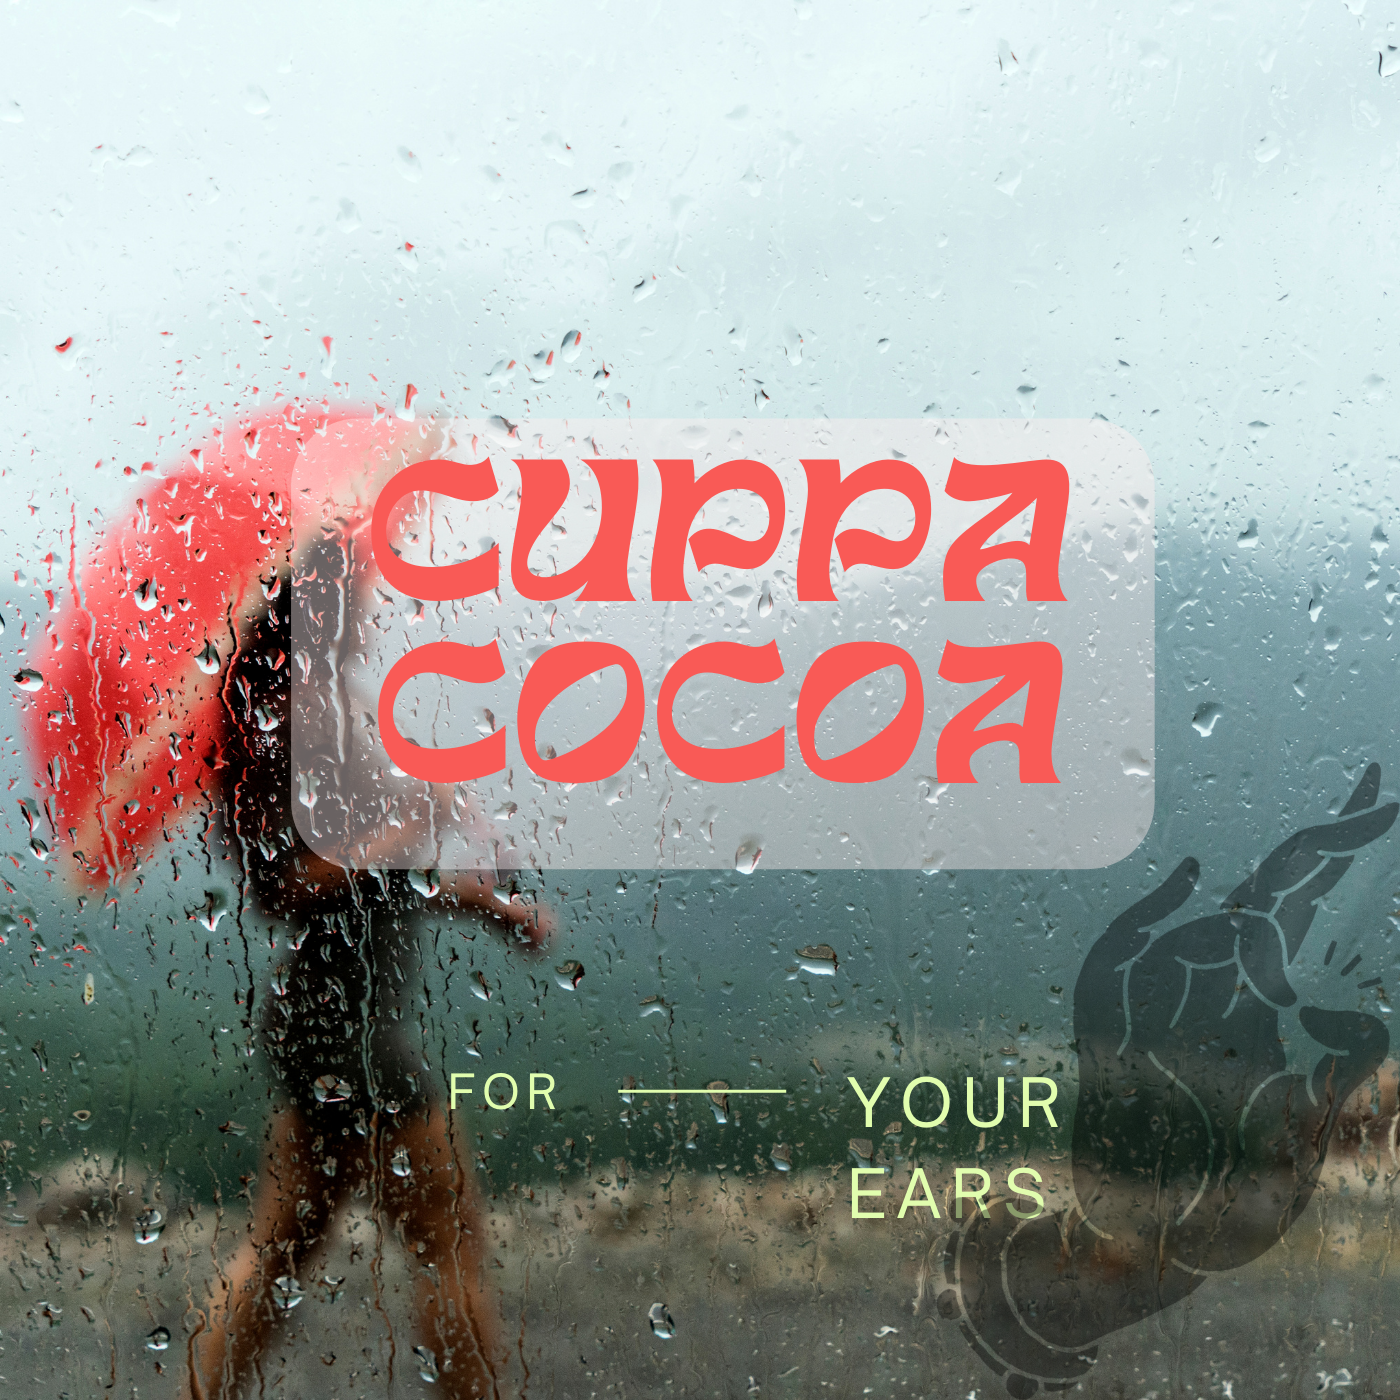 woman in rain cuppa cocoa primeaux playlist 16k celebrating cuppa cocoa for your ears spotify rainy window